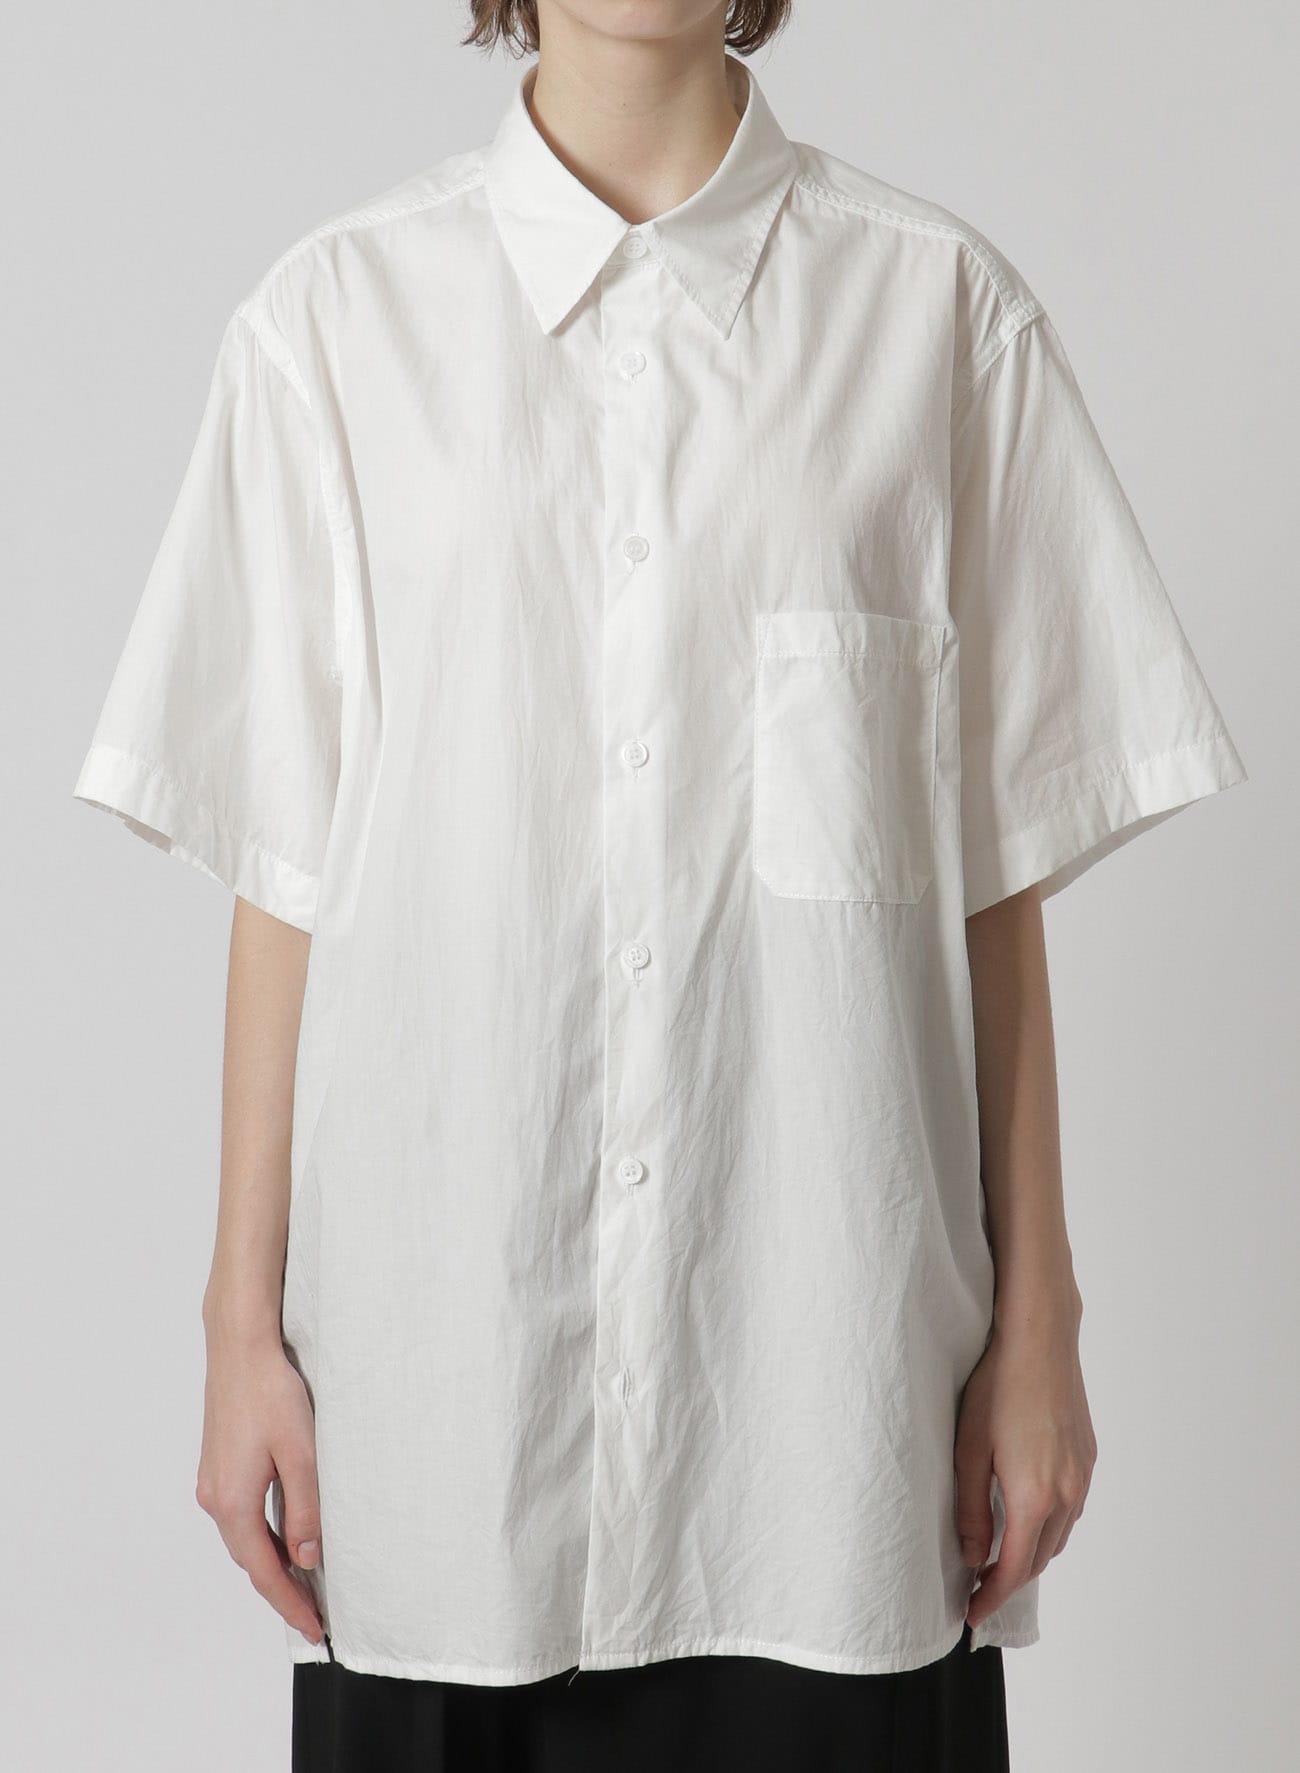 Y's-Black Name]COTTON TAPE SNAP SHIRT(S White): Y's｜THE SHOP 